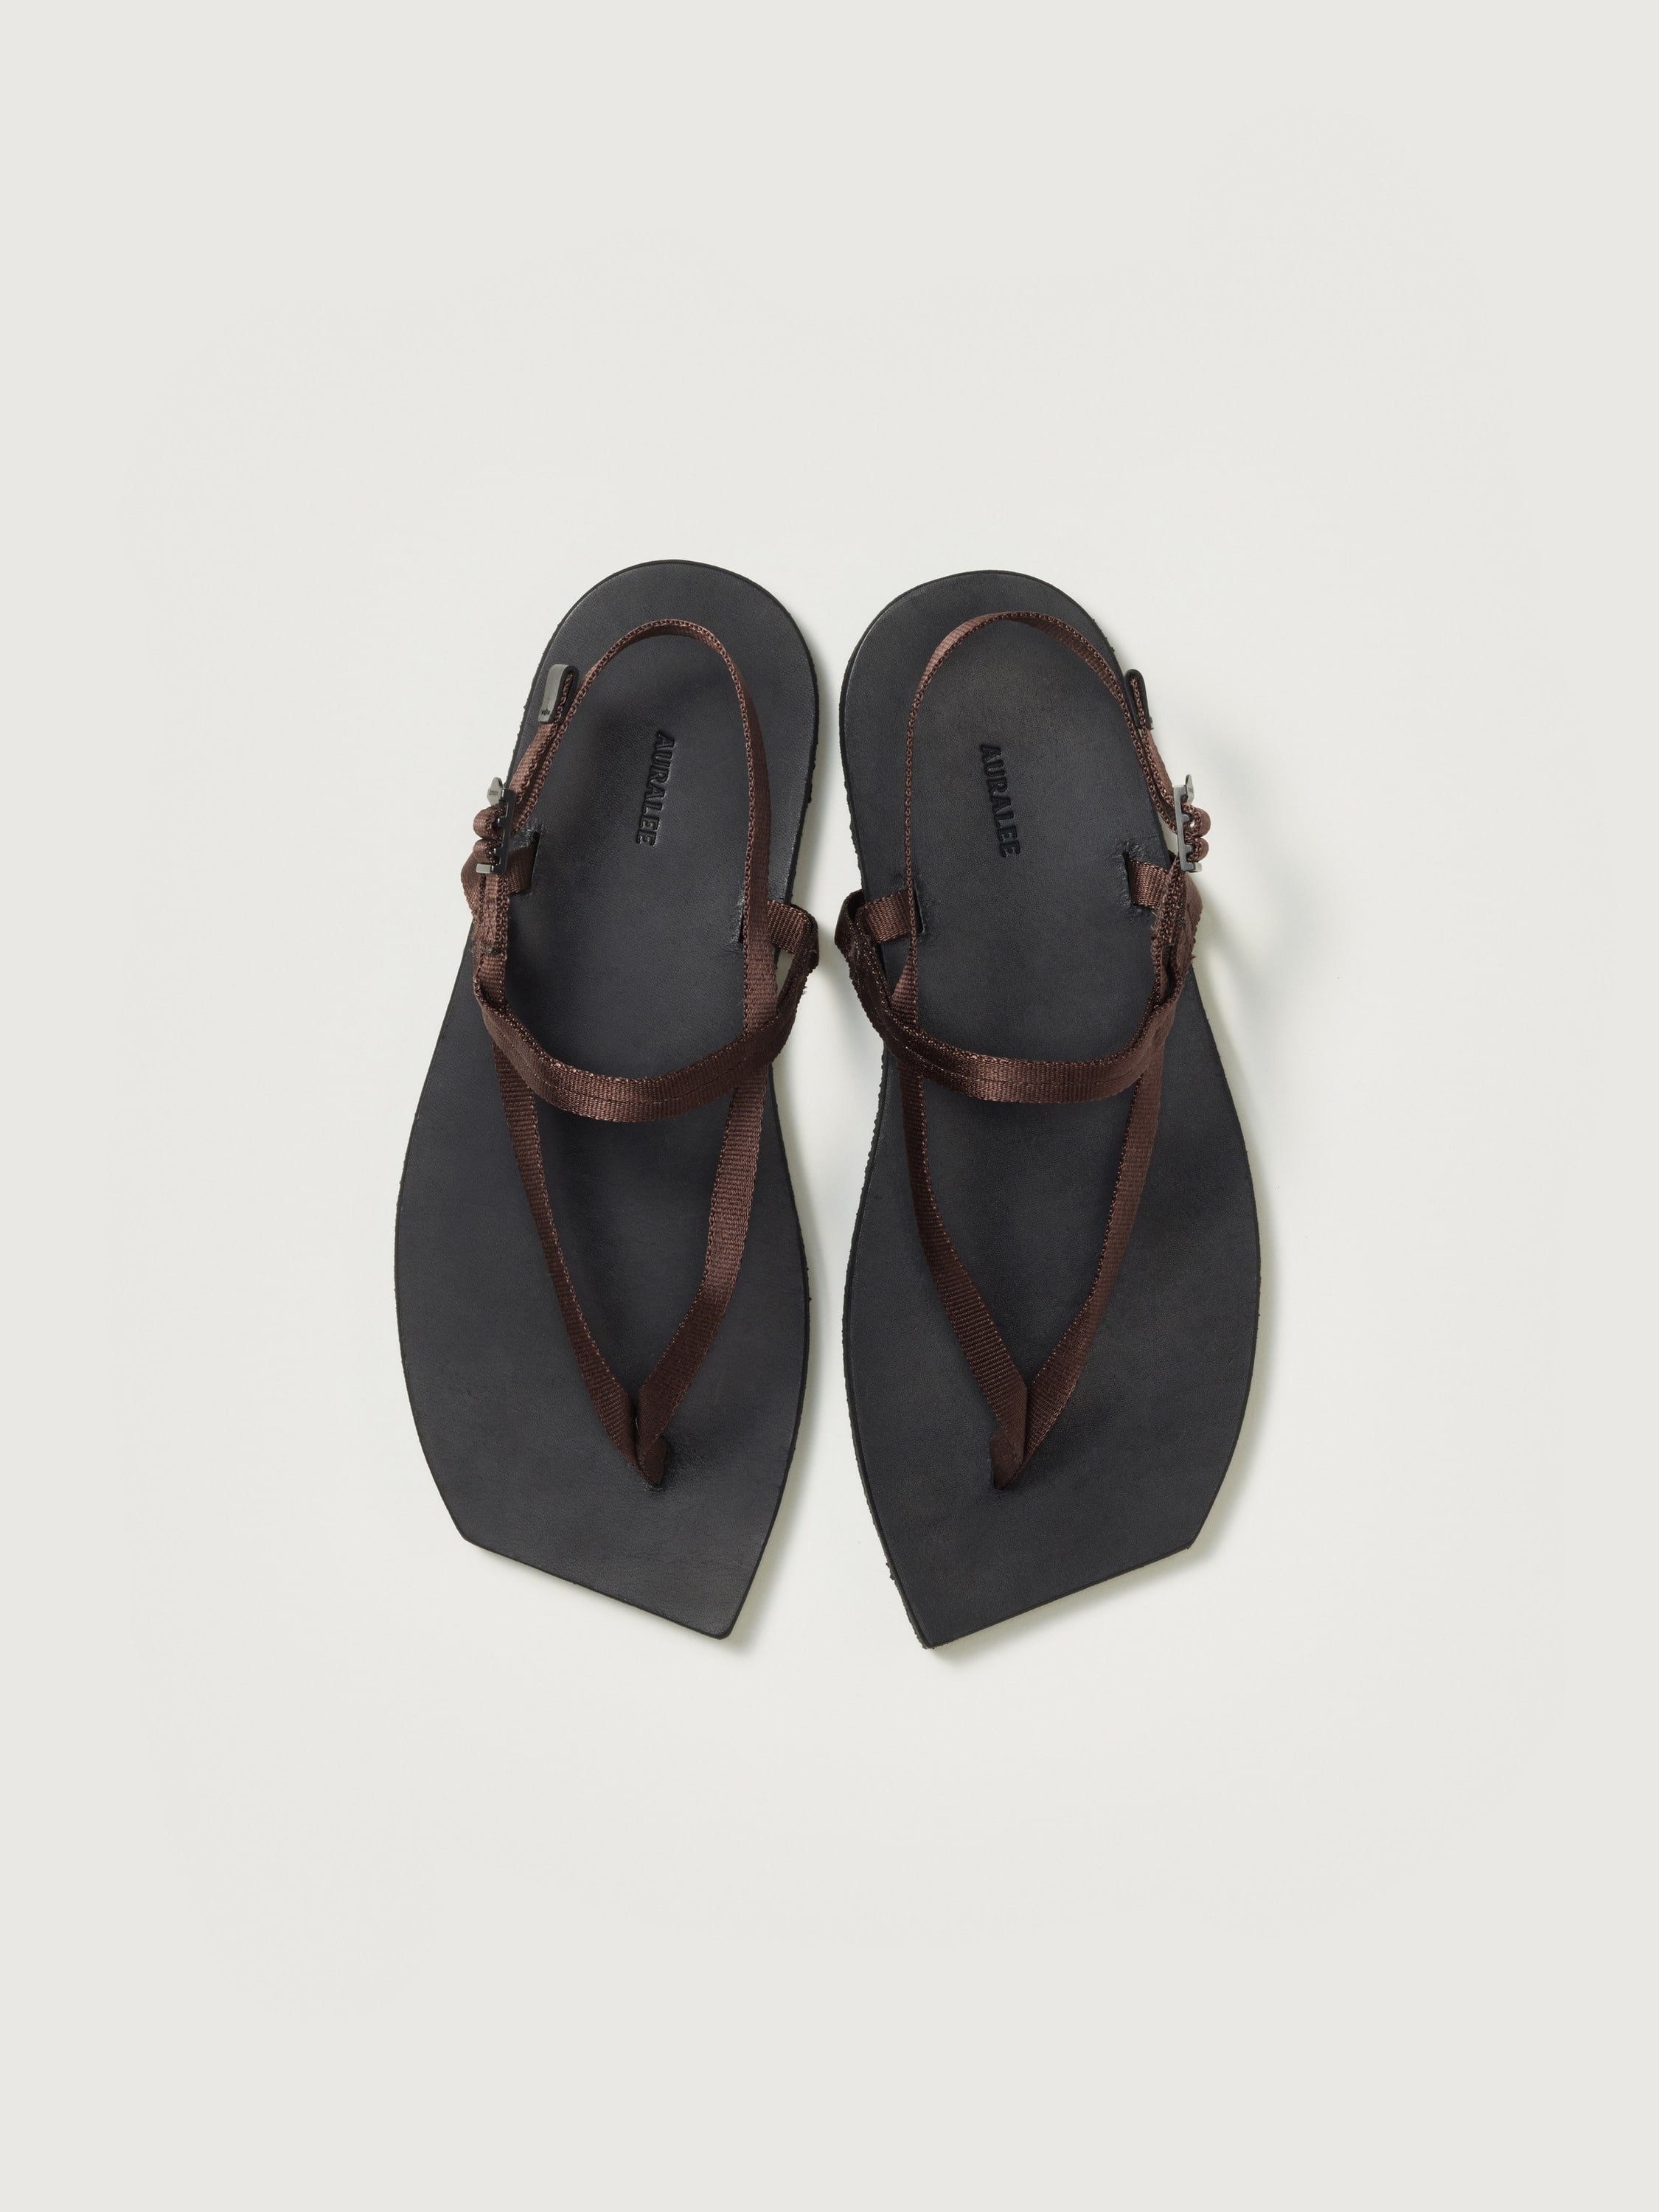 BELTED LEATHER SANDALS MADE BY FOOT THE COACHER 詳細画像 BLACK 3